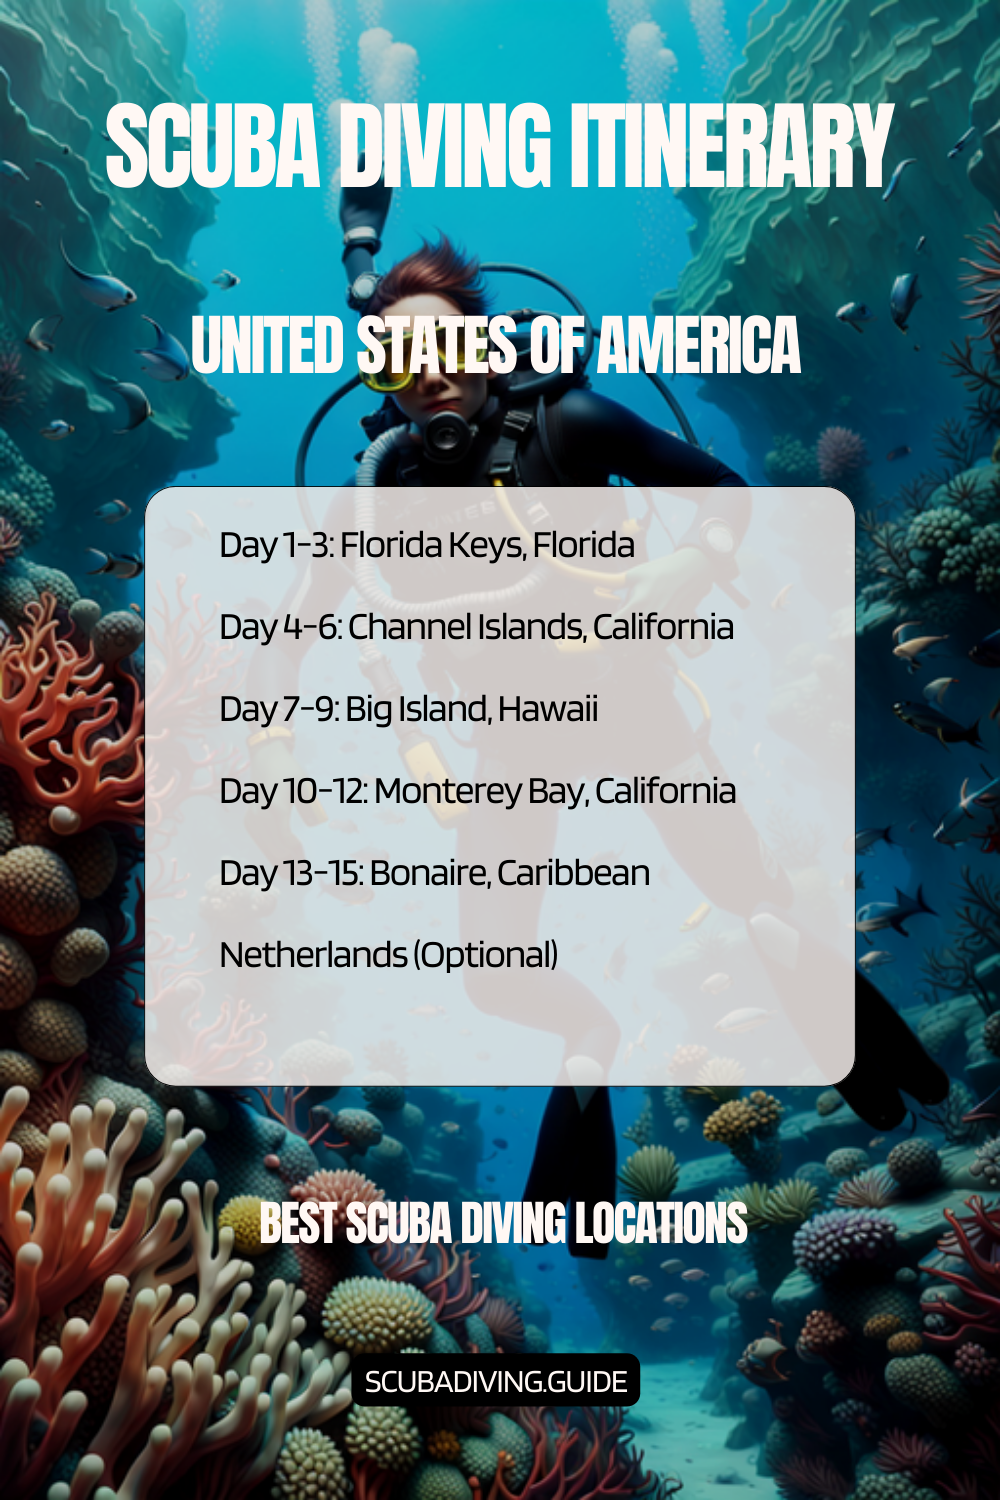 United States Of America Recommended Scuba Diving Itinerary